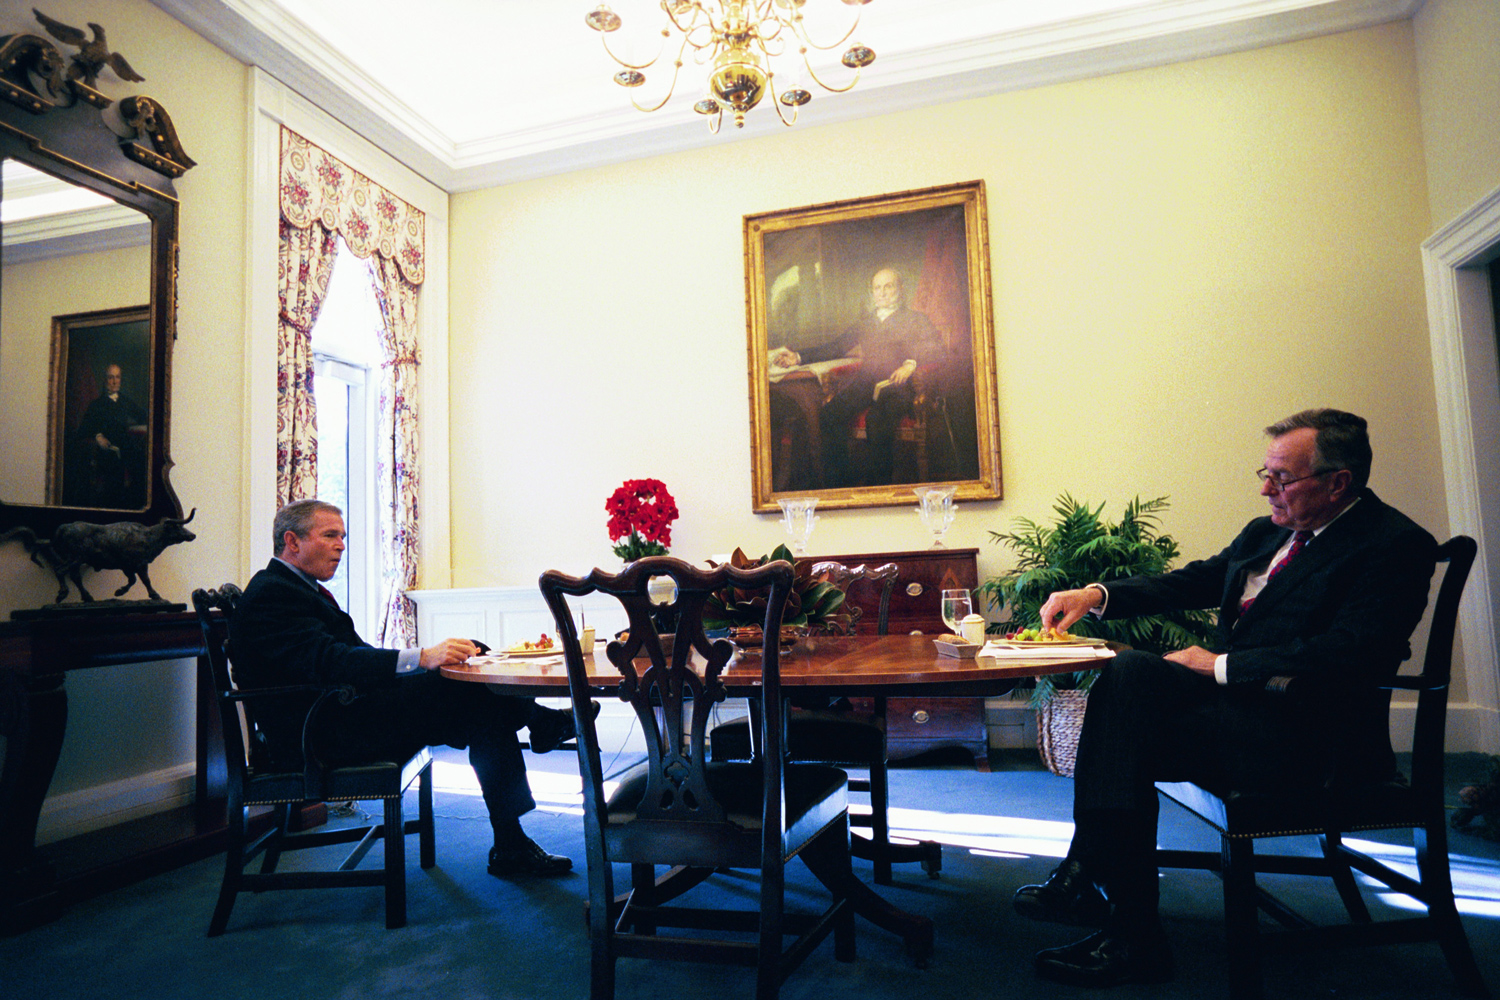 Dec. 12, 2003. President Bush and his father lunch in the private Oval Office dining room under the portraits of President John Quincy Adams, the only other president who was the son of a former U.S. President.“They had such a normal relationship, much more father and son than two presidents.”